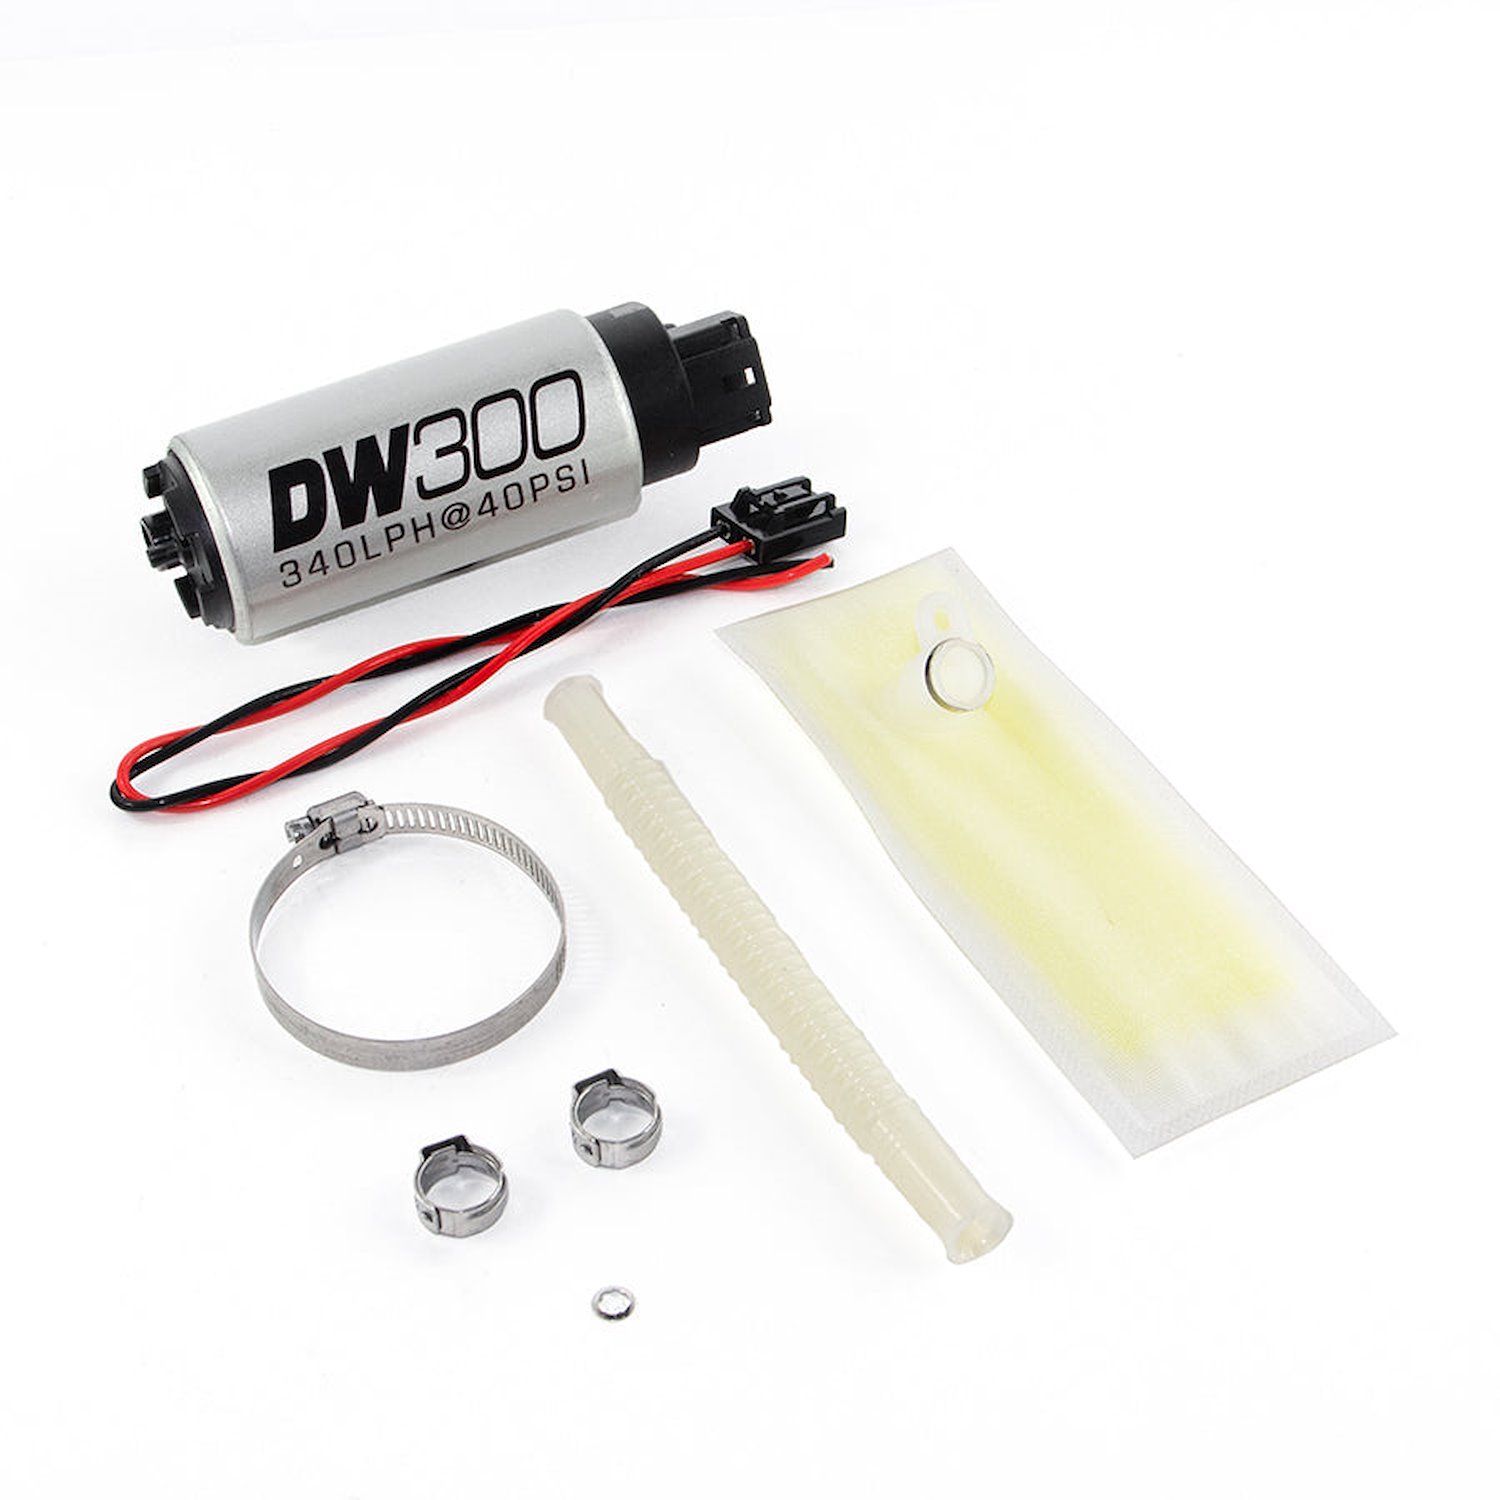 93011031 DW300 Series 340lph In-tank Fuel Pump w/ Install Kit for BMW